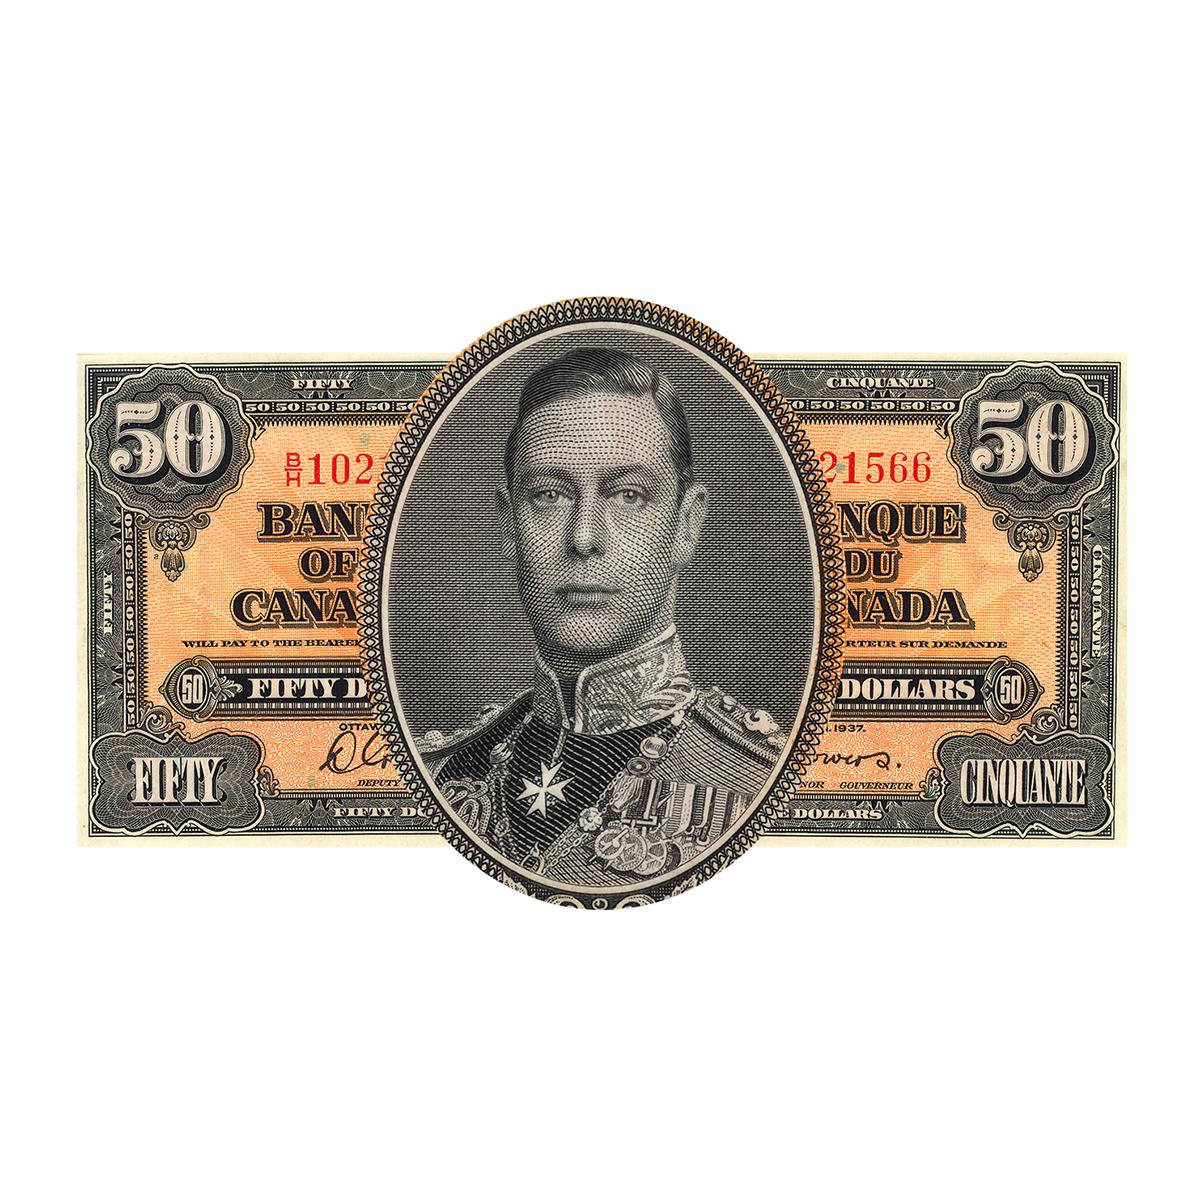 Bank note portrait, young white man in high-collared military uniform with medals.